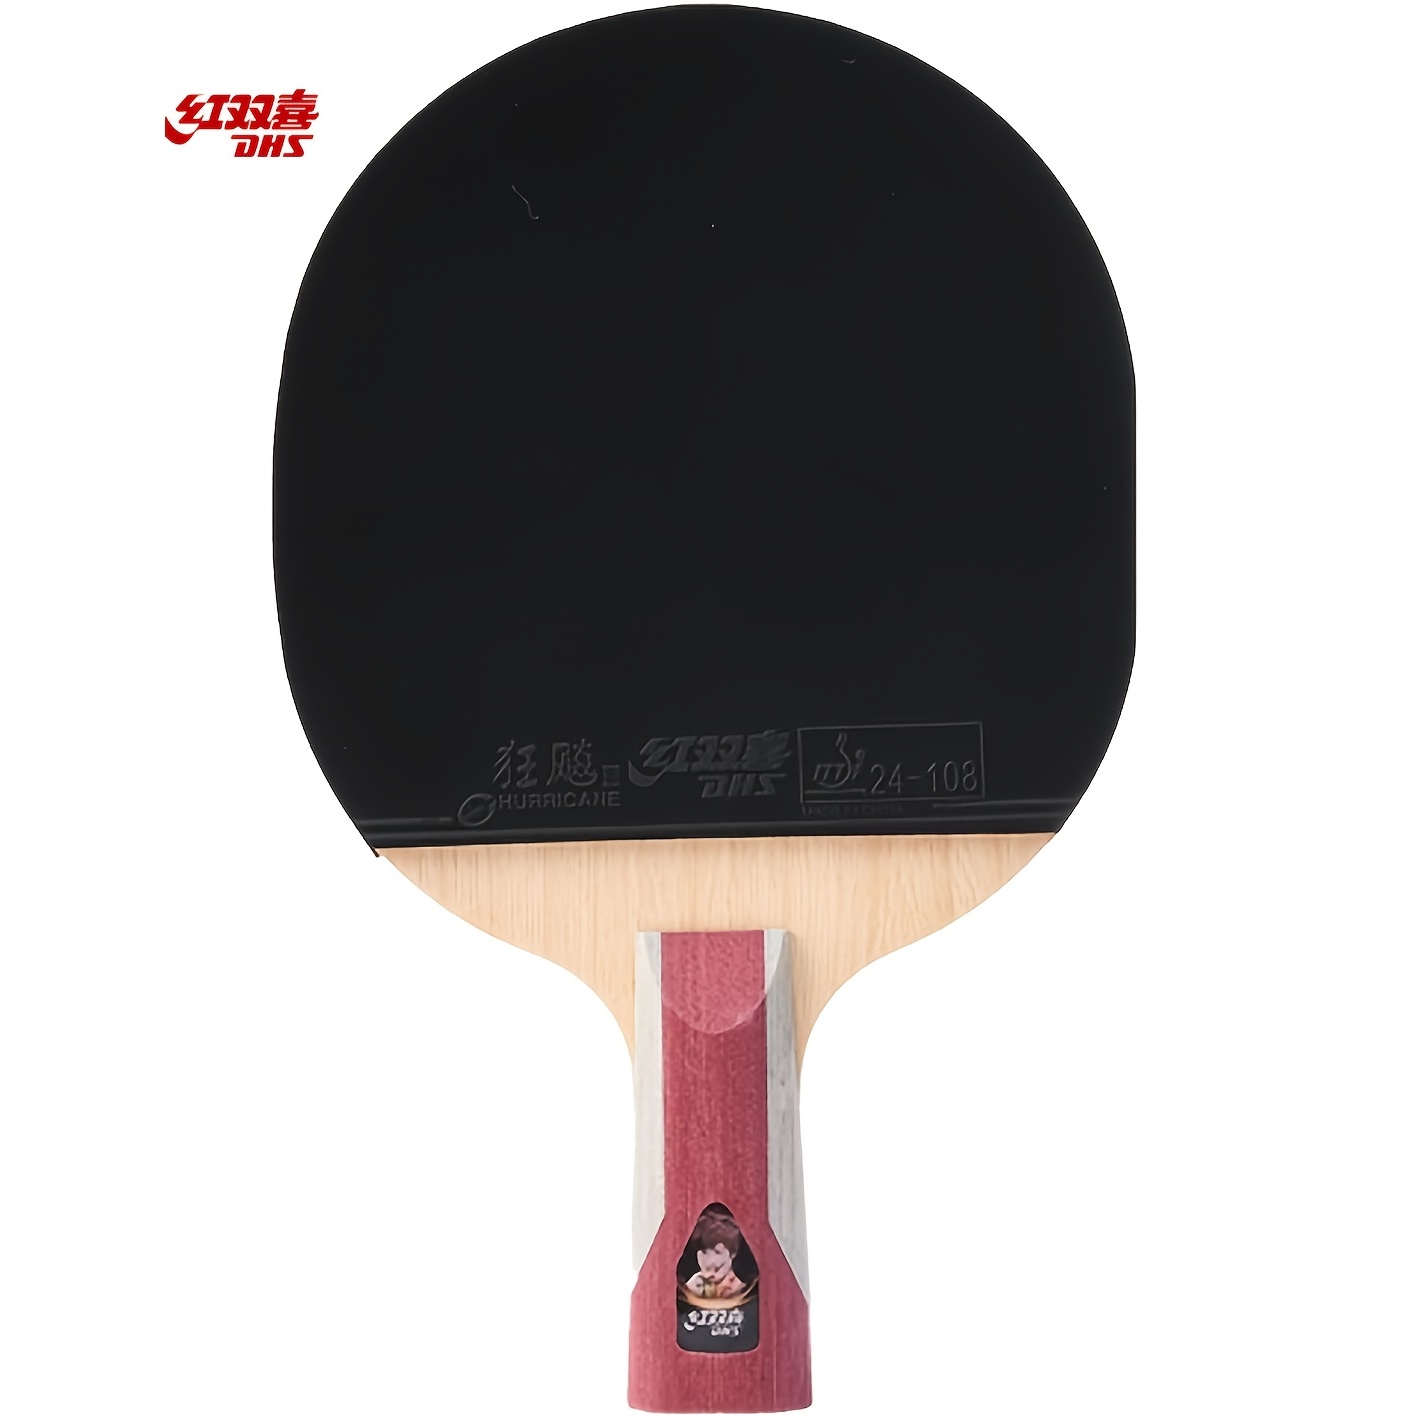 Upgrade Your Table Tennis Game With The Dhs Ping Pong Racquet - 6 Stars Double Sided Reverse Rubber H6006